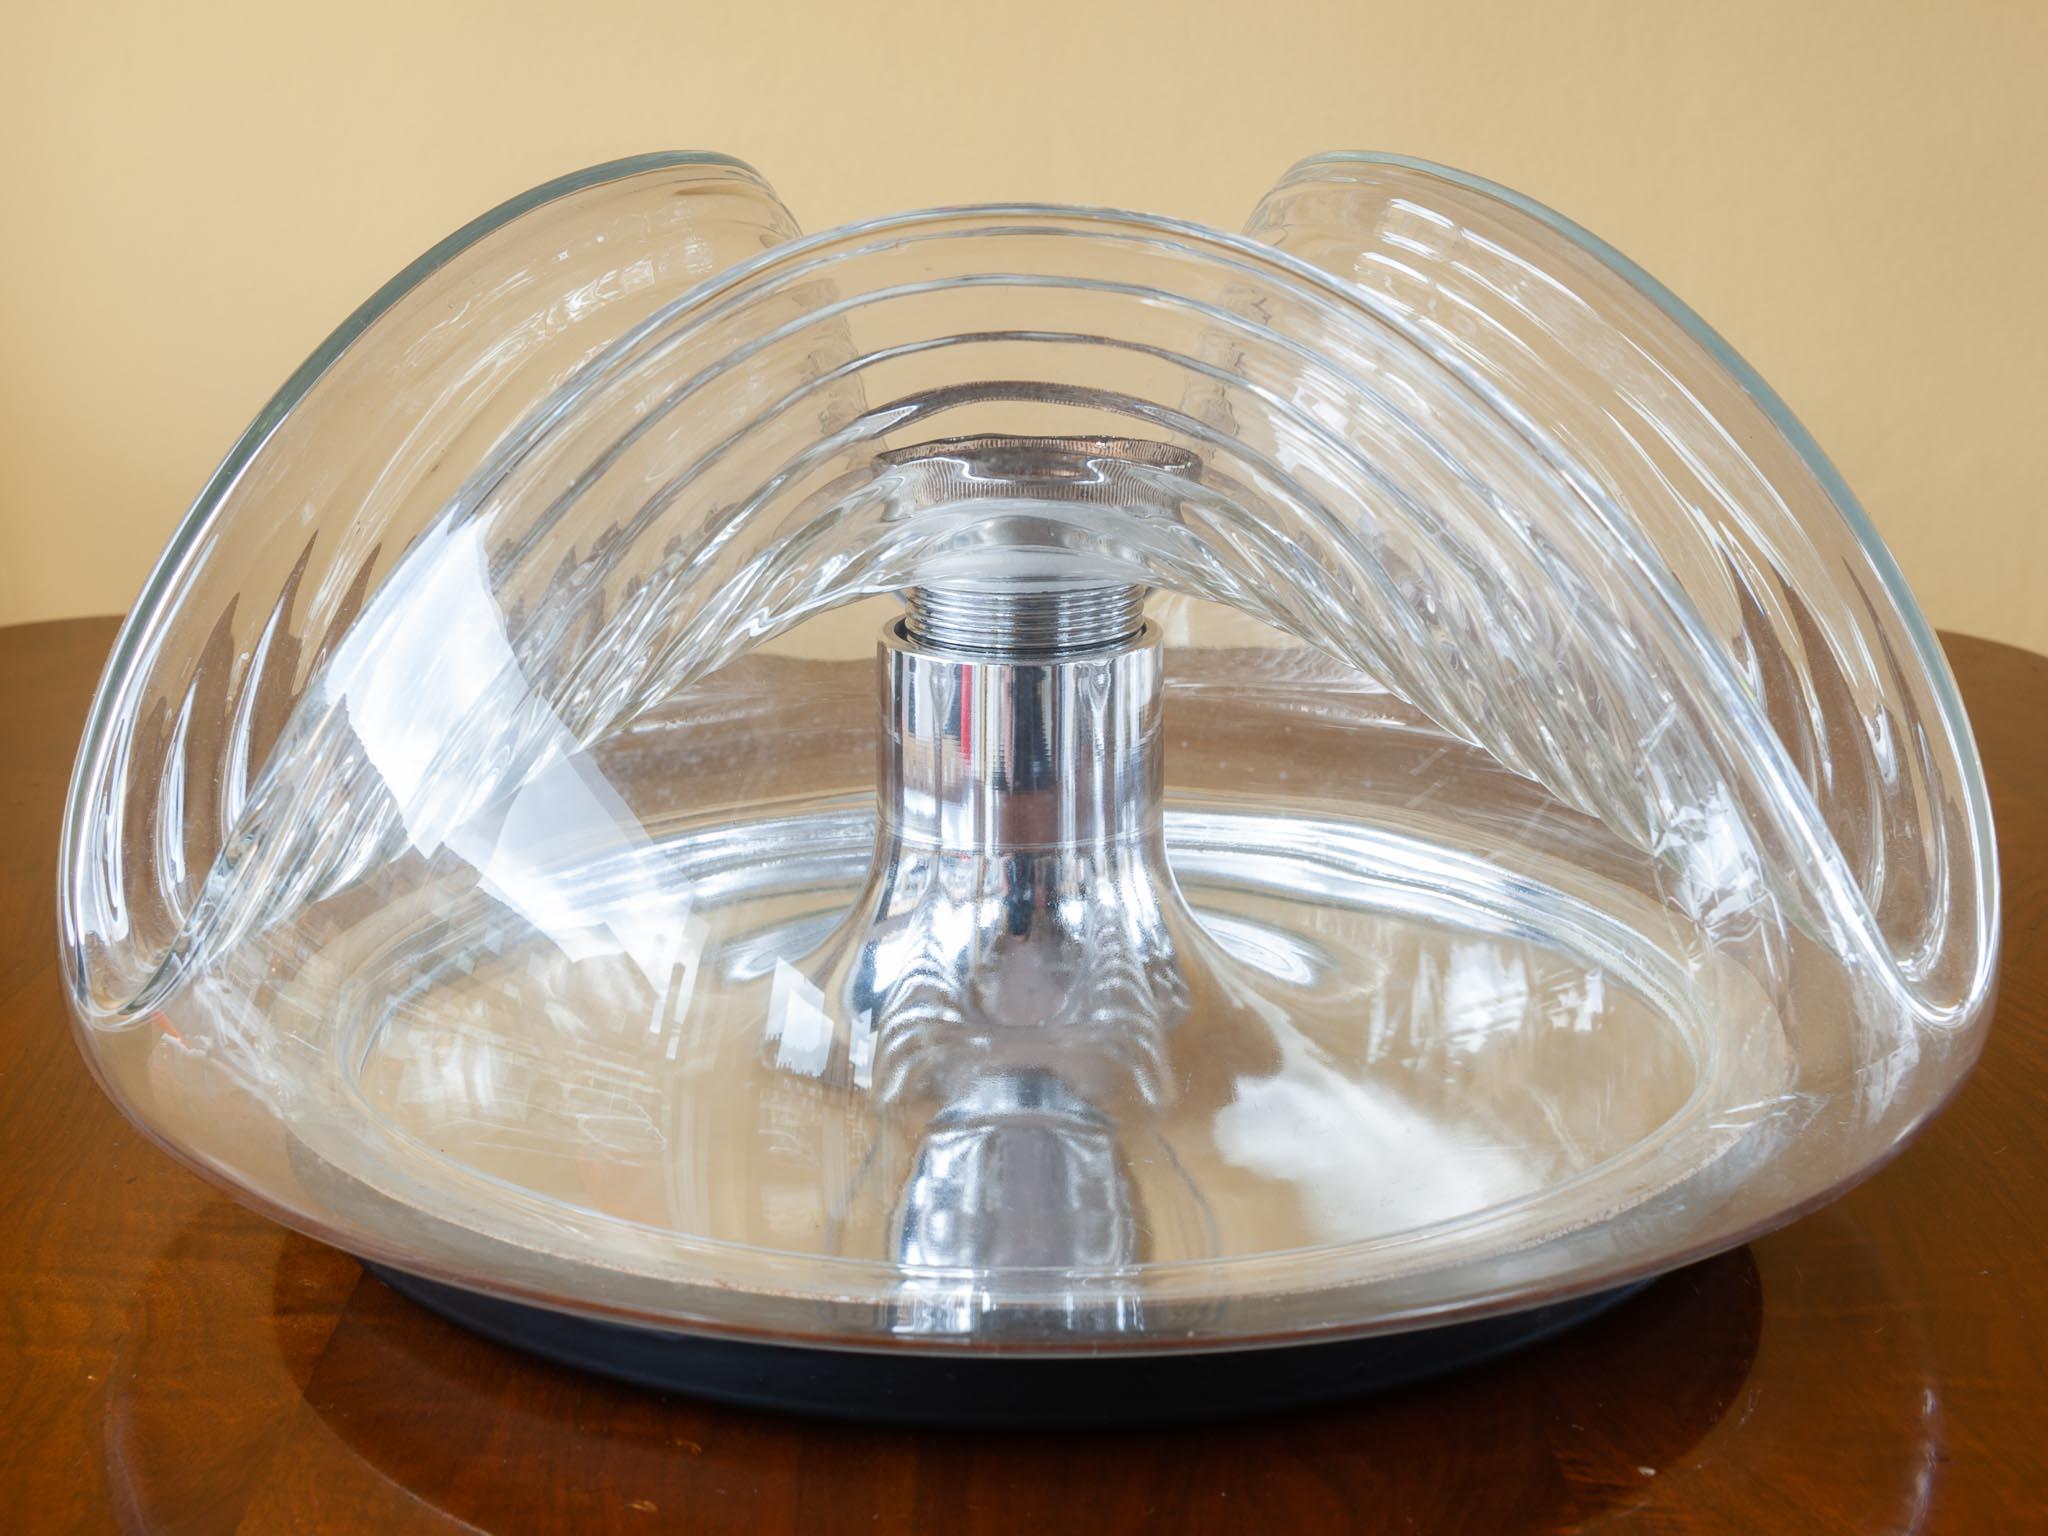 1970s 'Wave' clear glass wall or ceiling light with a chrome reflective base plate designed by Kock and Lowy for Peill & Putzler Germany. A Space Age futuristic light which is a design Classic having won a number of awards. The light socket shows